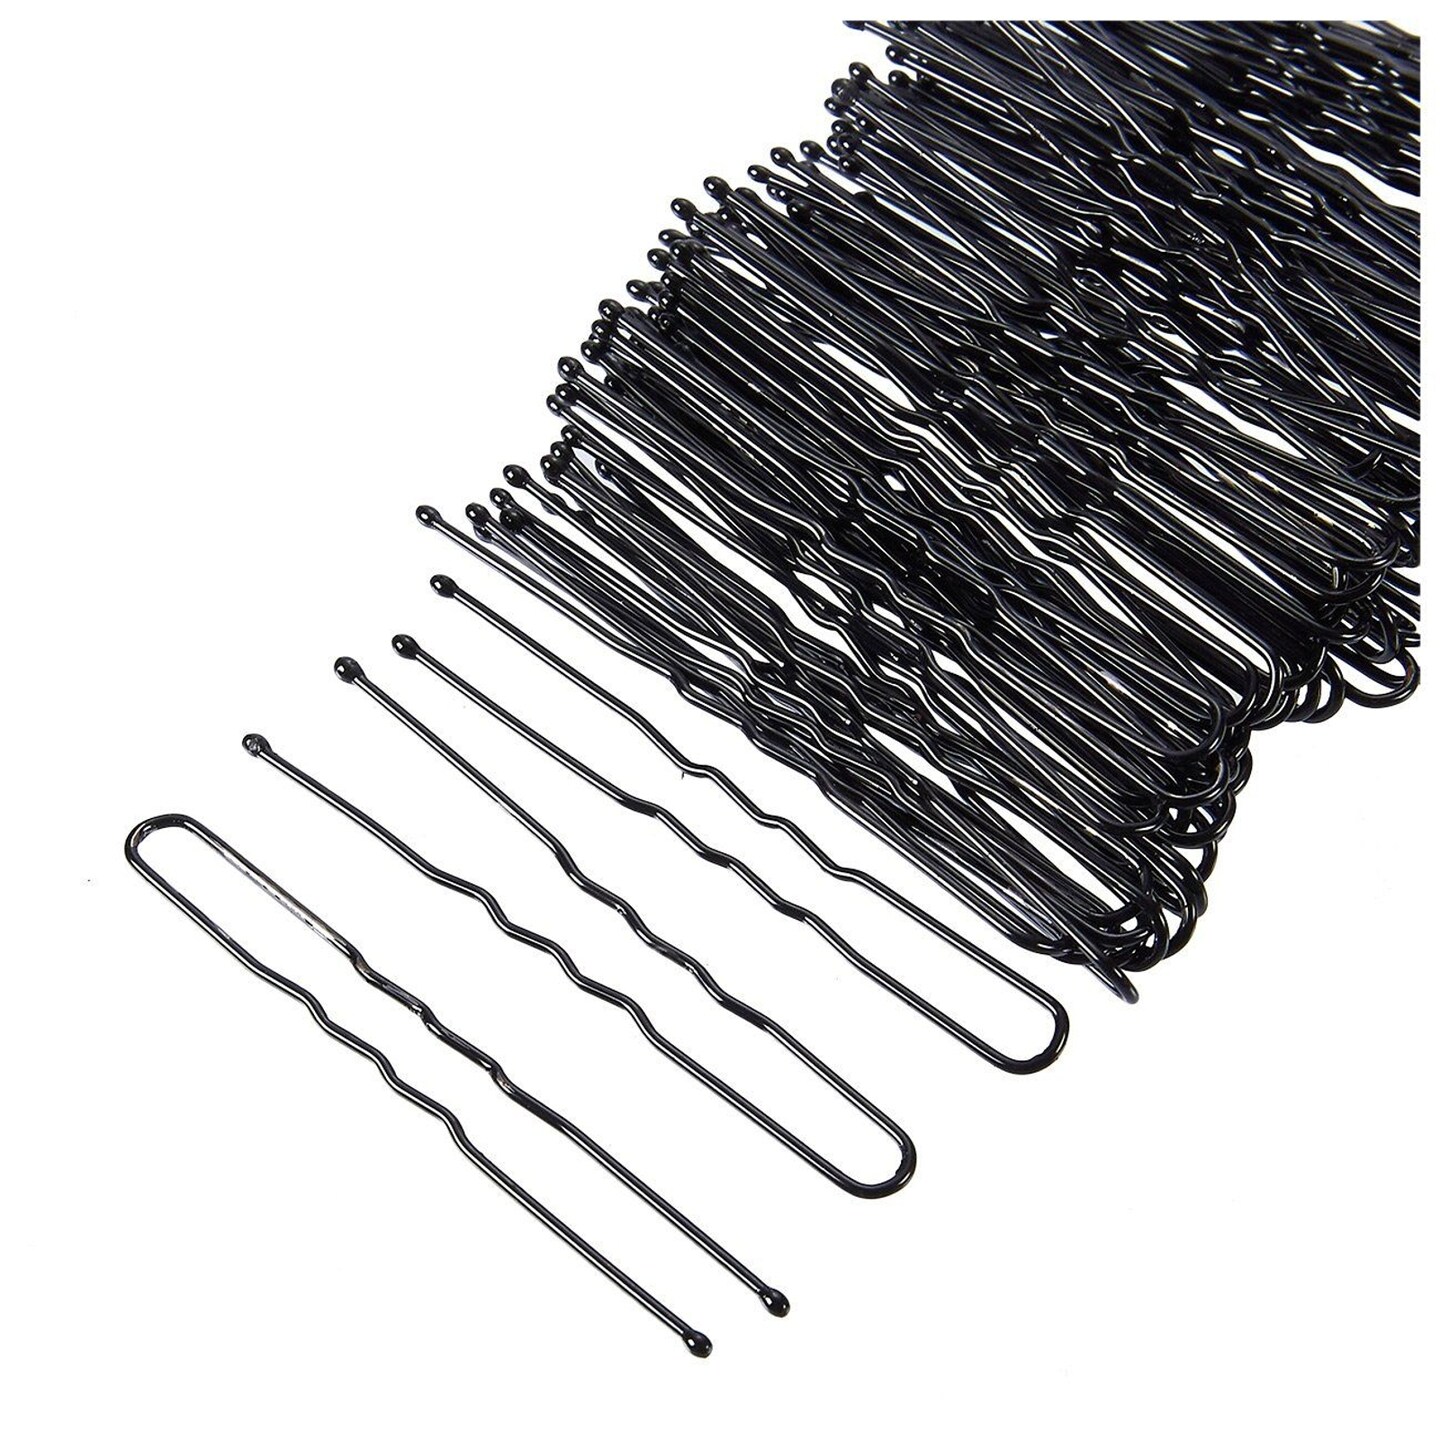 Hair Pins - 540-Count U-Shaped Hairpins, Hair Clips for Updo Hairstyles,  Hair Styling Accessories, Black, 2 Inches